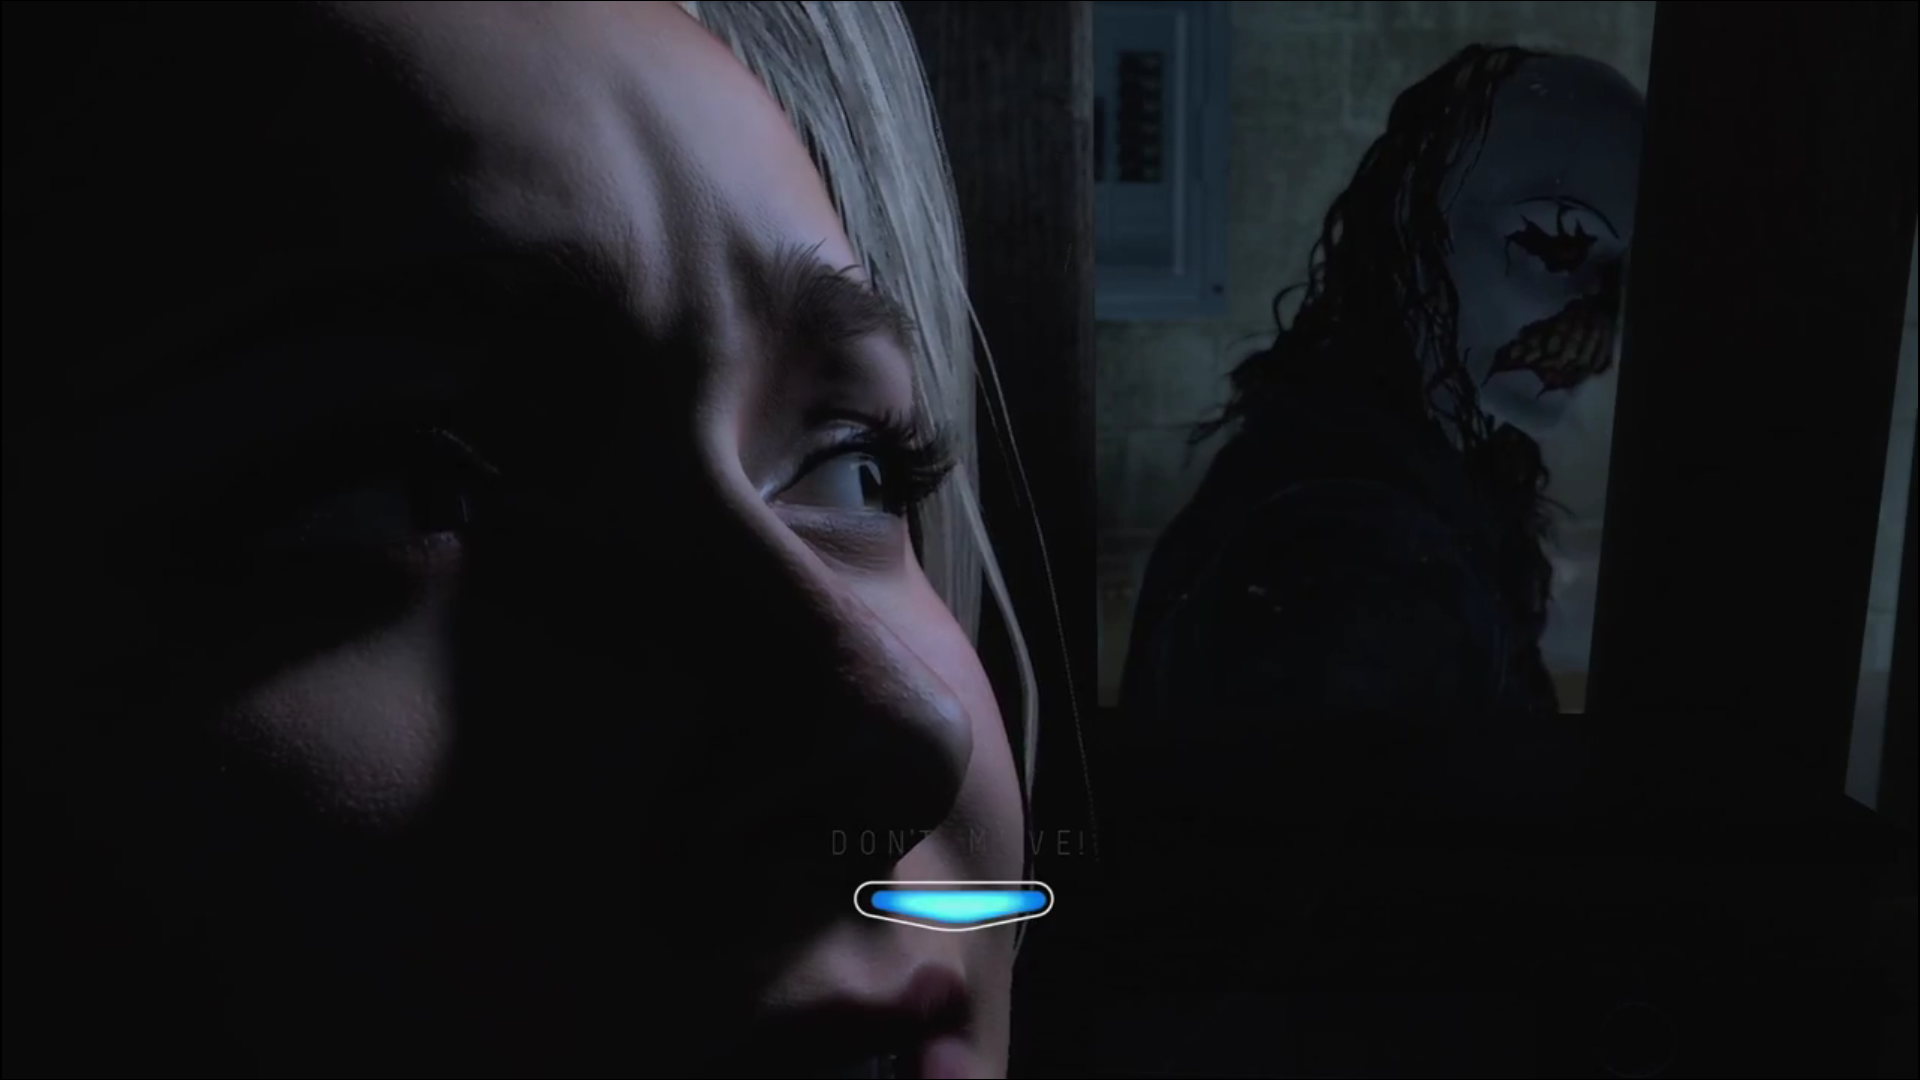 Horror Movie Simulator, Until Dawn, Shows Off Eight Minutes of Gameplay/Footage